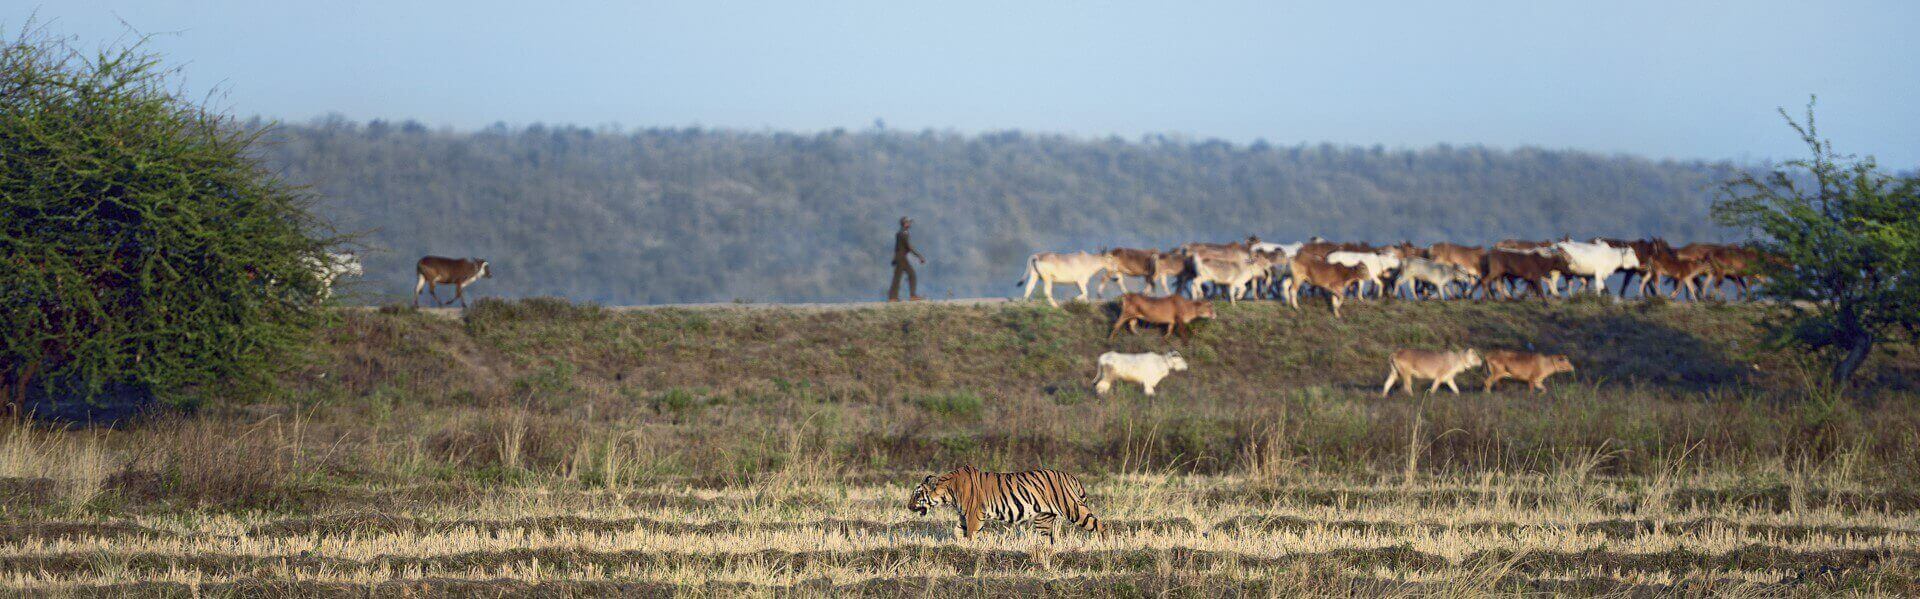 Tiger and cattle Tadoba